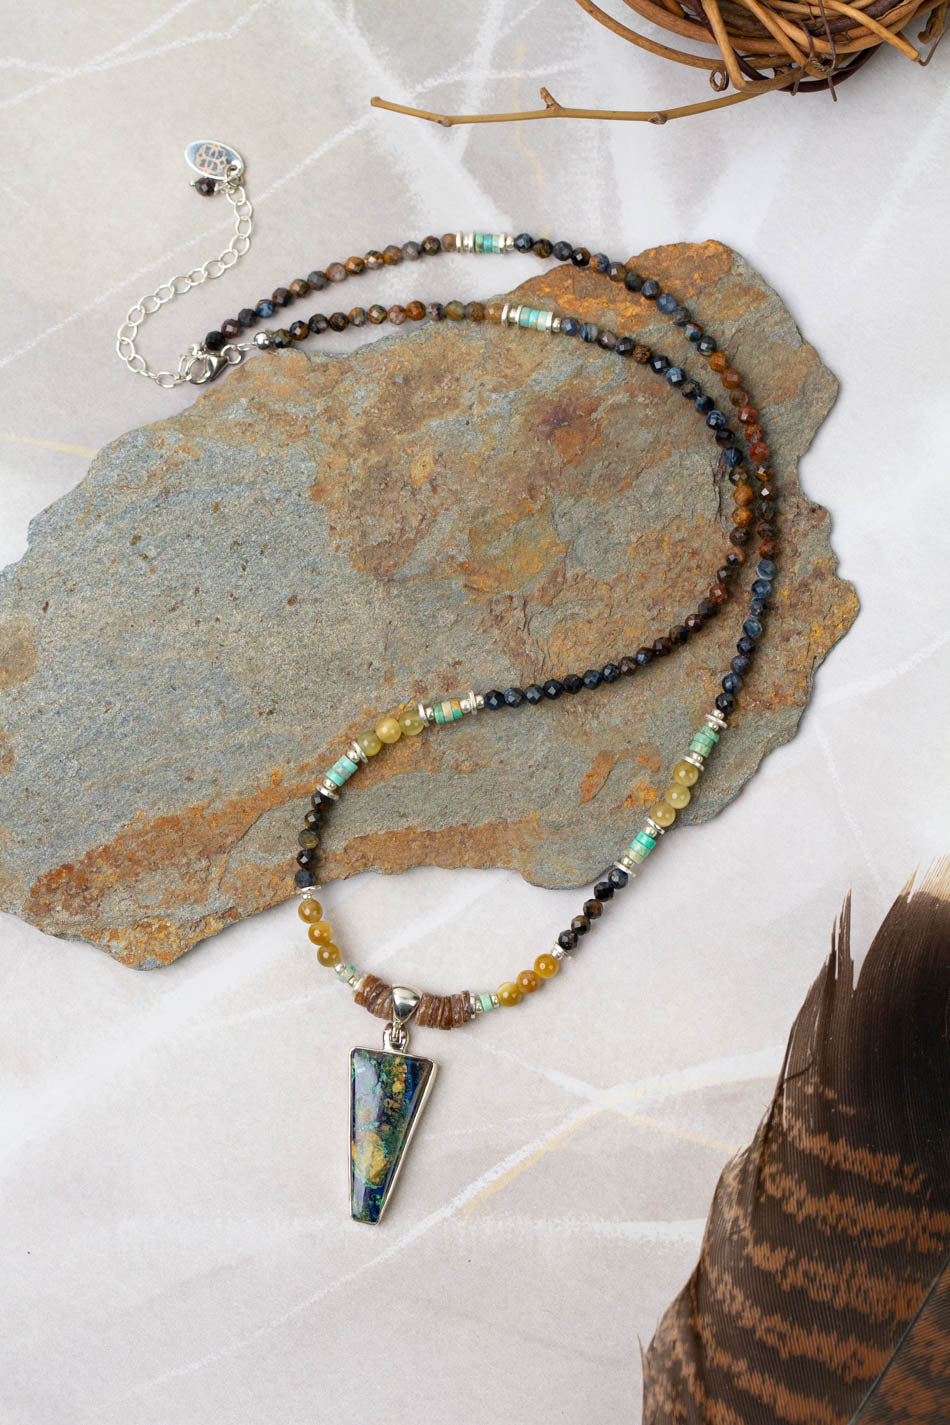 One Of A Kind 18.5-20.5" Pietersite, Yellow Tigers Eye, Chrysocolla With Azurite Malachite Triangle Pendant Collage Necklace